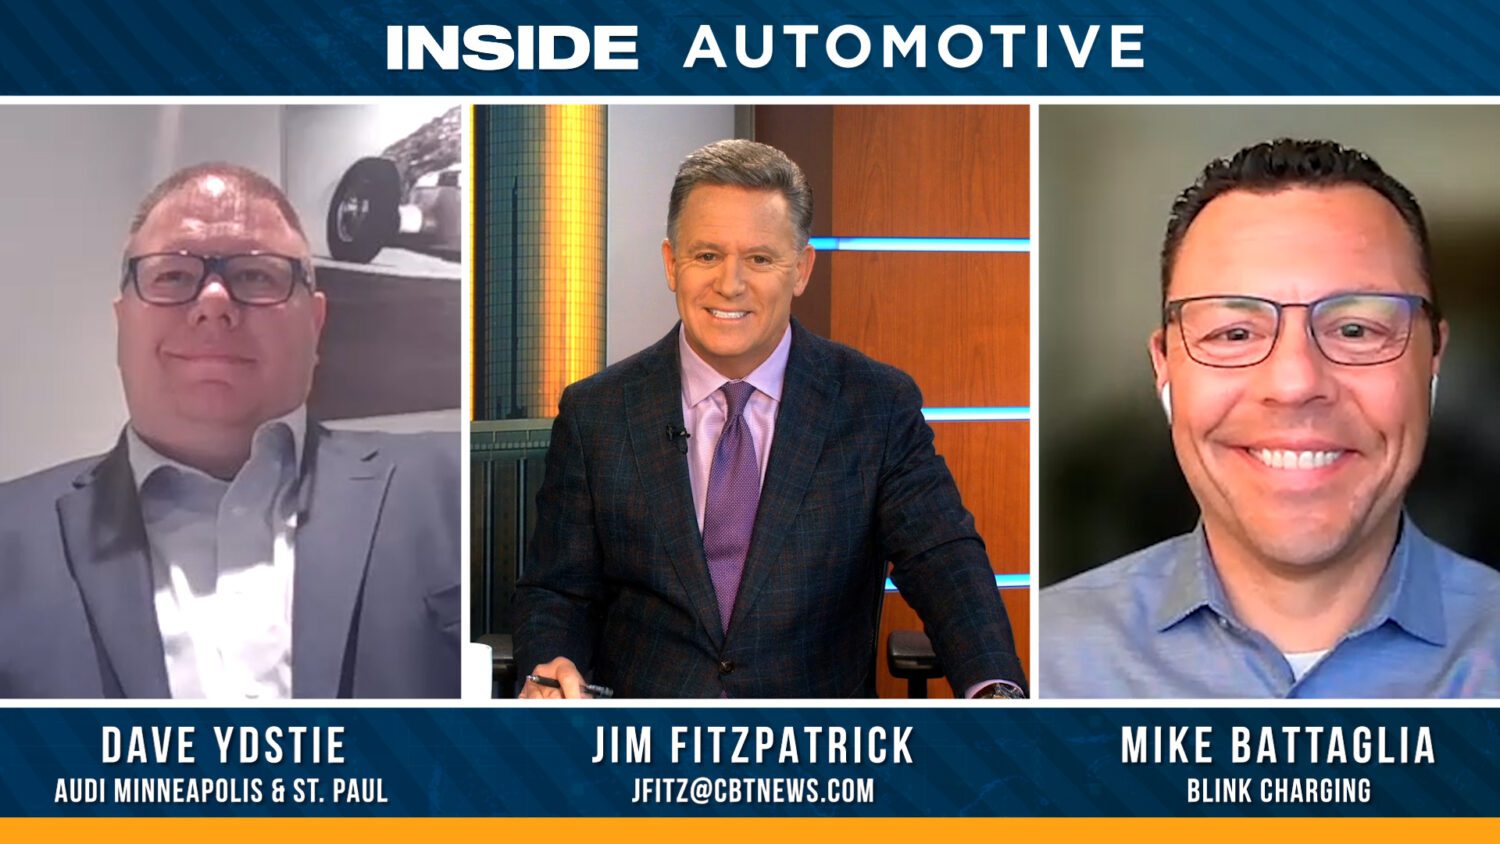 Dave Ydstei and Mike Battaglia join the show to discuss how a Blink Charging partnership can prepare dealers for the electric vehicle shift